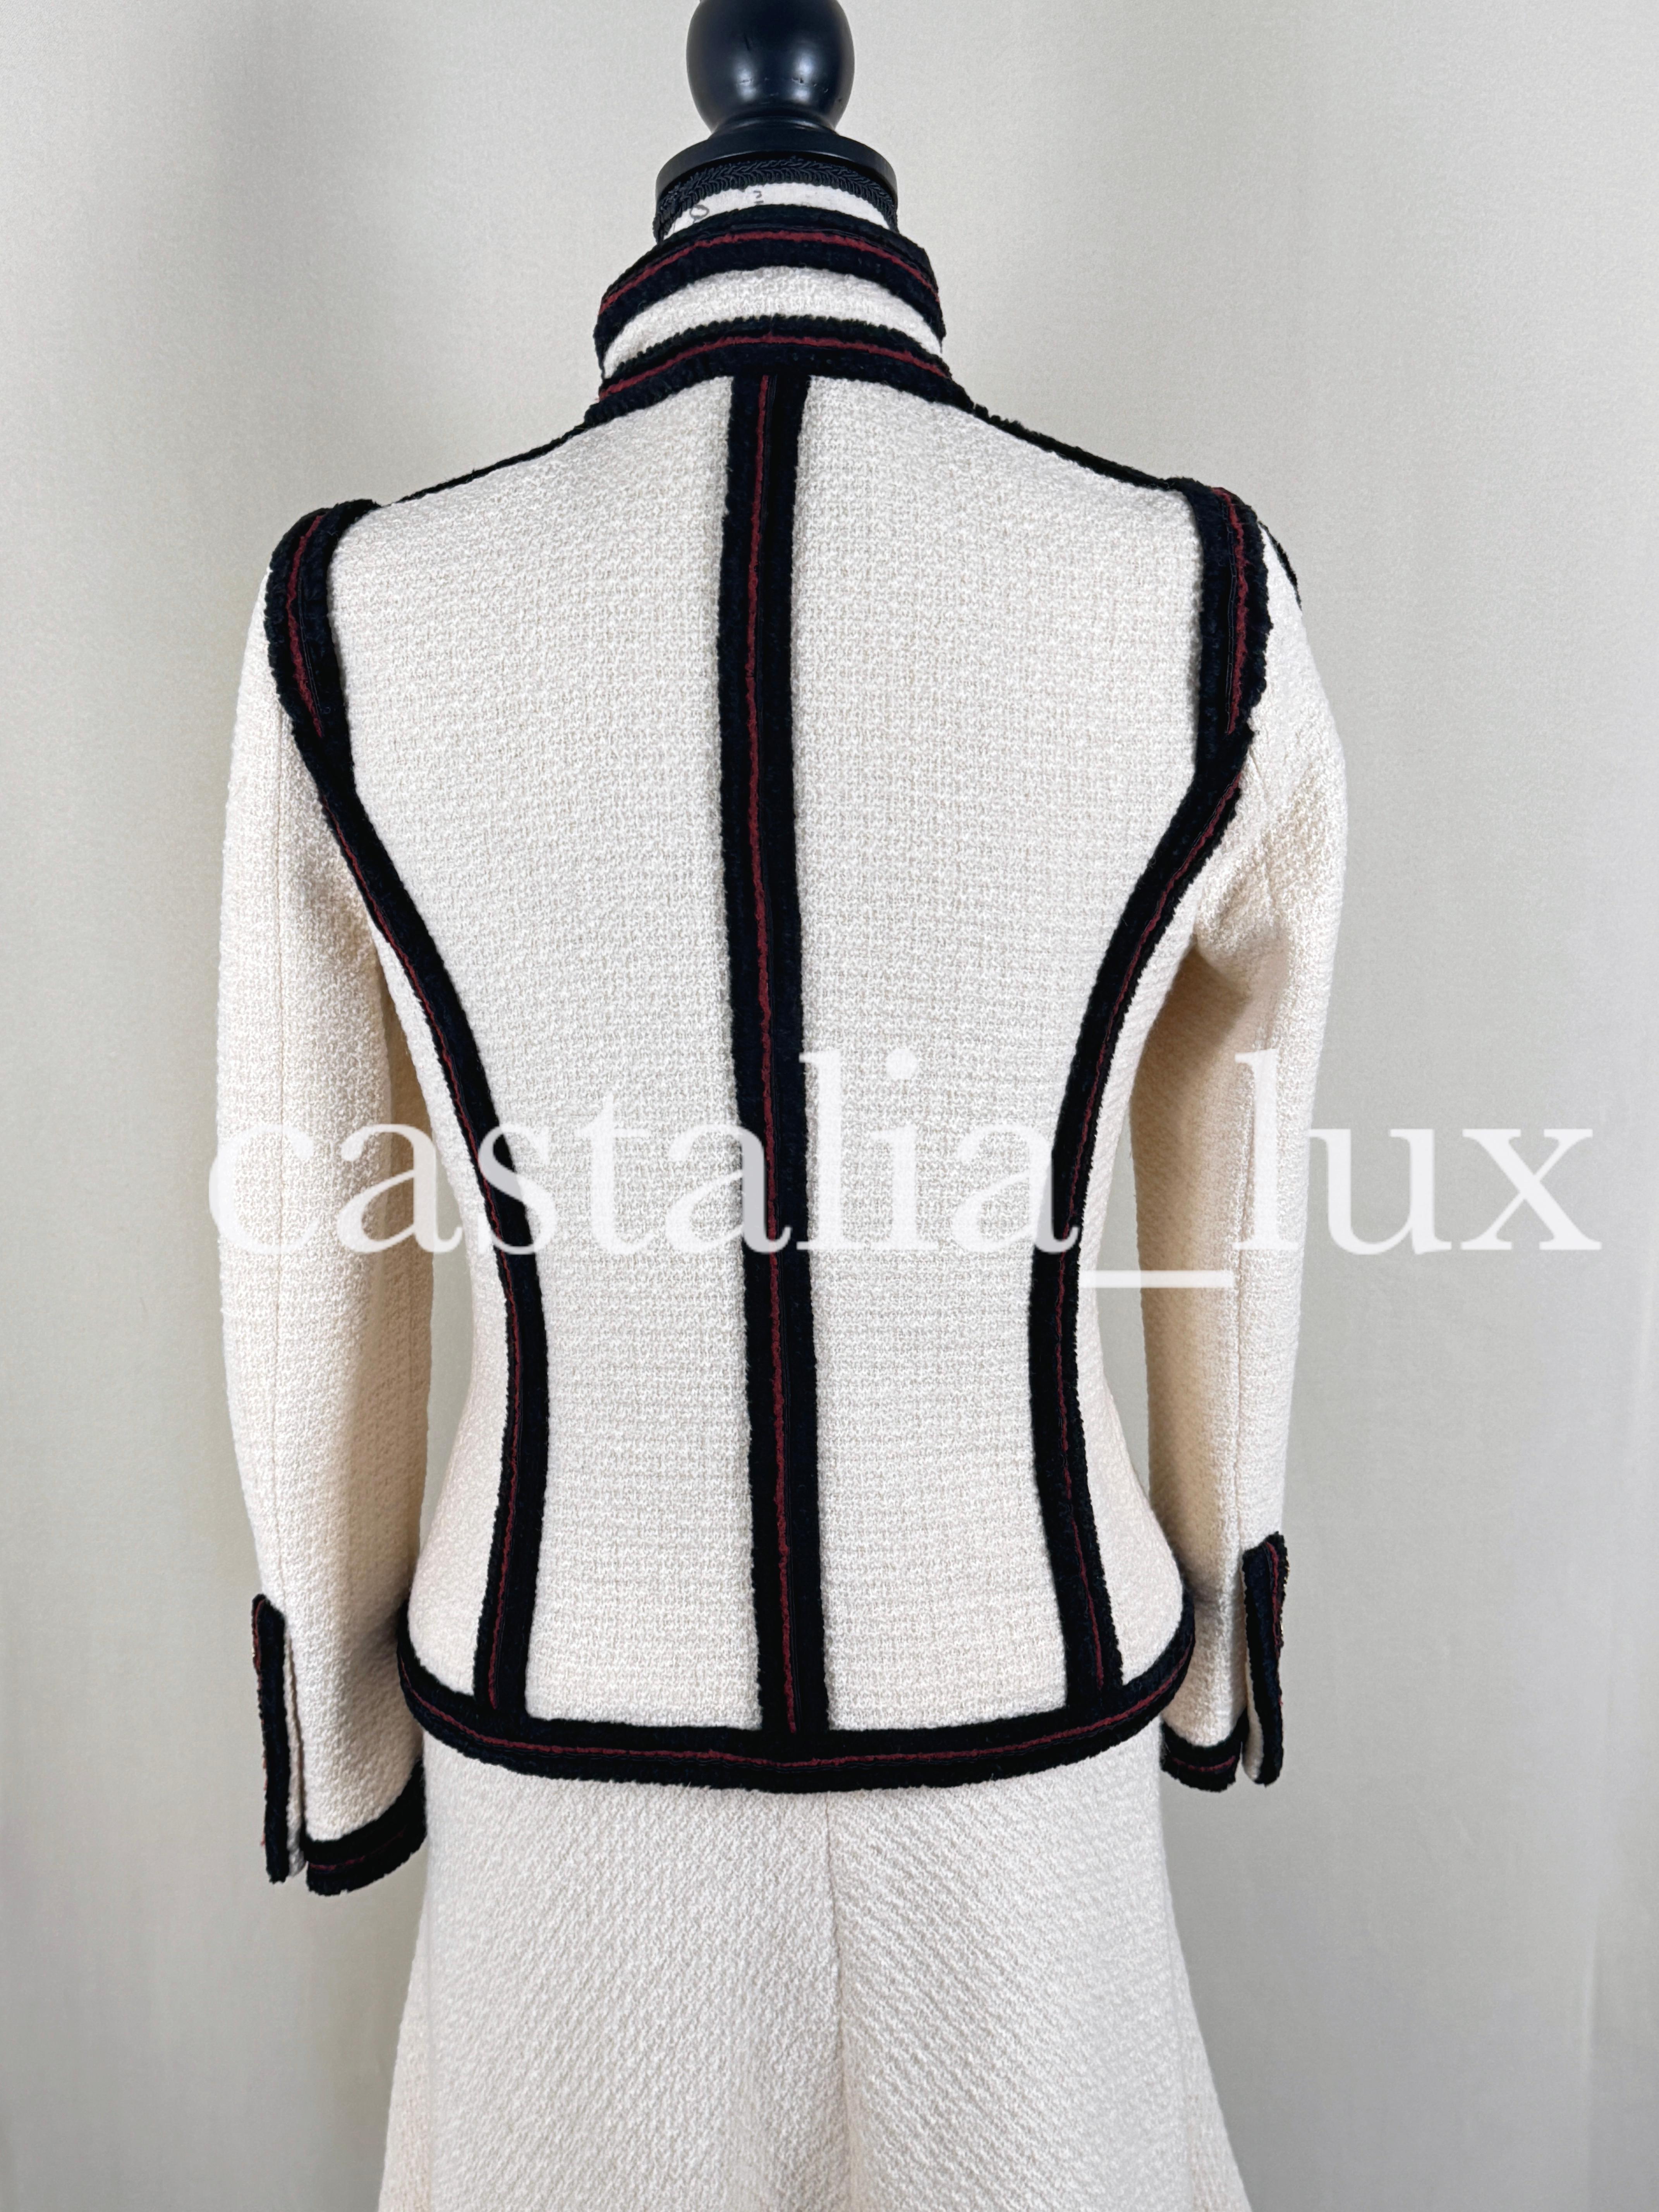 Chanel Kate Moss Style Collectors Tweed Jacket For Sale 14